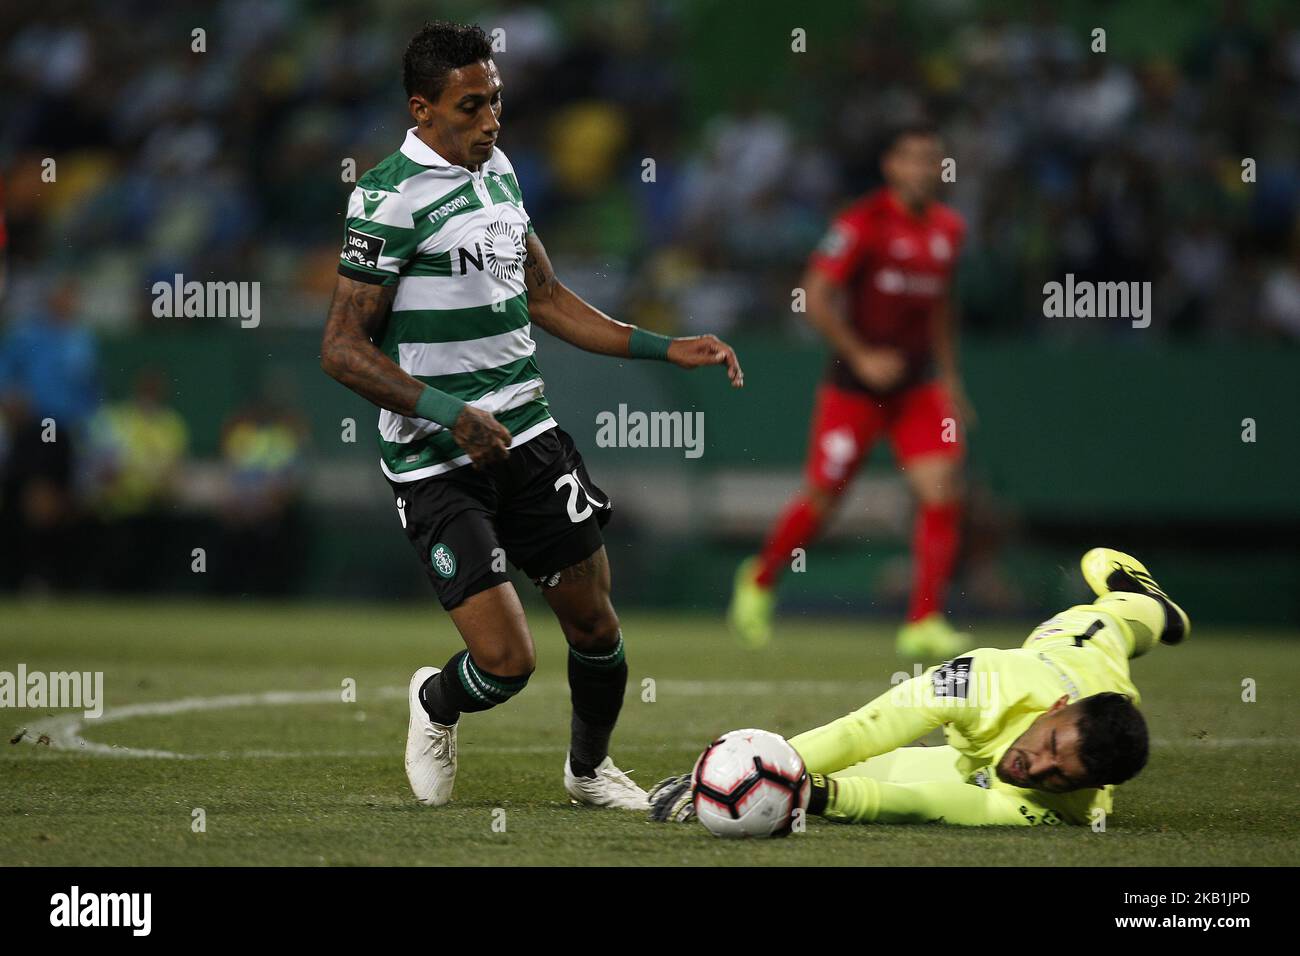 Raphinha of Sporting (L) vies for the ball with Amir Abedzadeh of Maritimo (R) during Primeira Liga 2018/19 match between Sporting CP vs CS Maritimo, in Lisbon, on September 29, 2018. (Photo by Carlos Palma/NurPhoto) Stock Photo